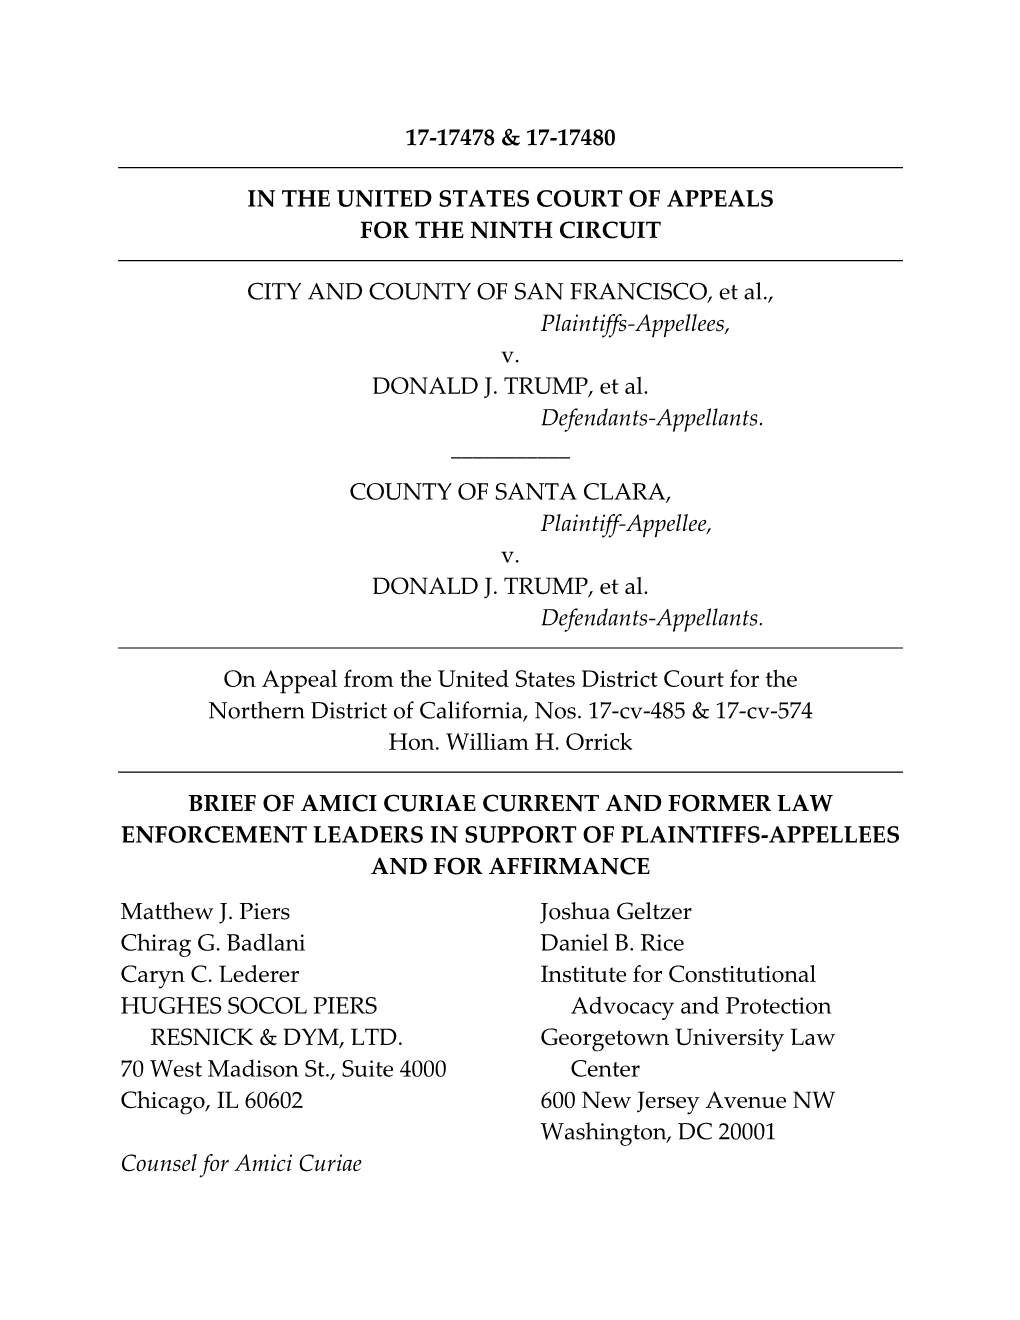 Brief of Amici Curiae Current and Former Law Enforcement Leaders in Support of Plaintiffs-Appellees and for Affirmance